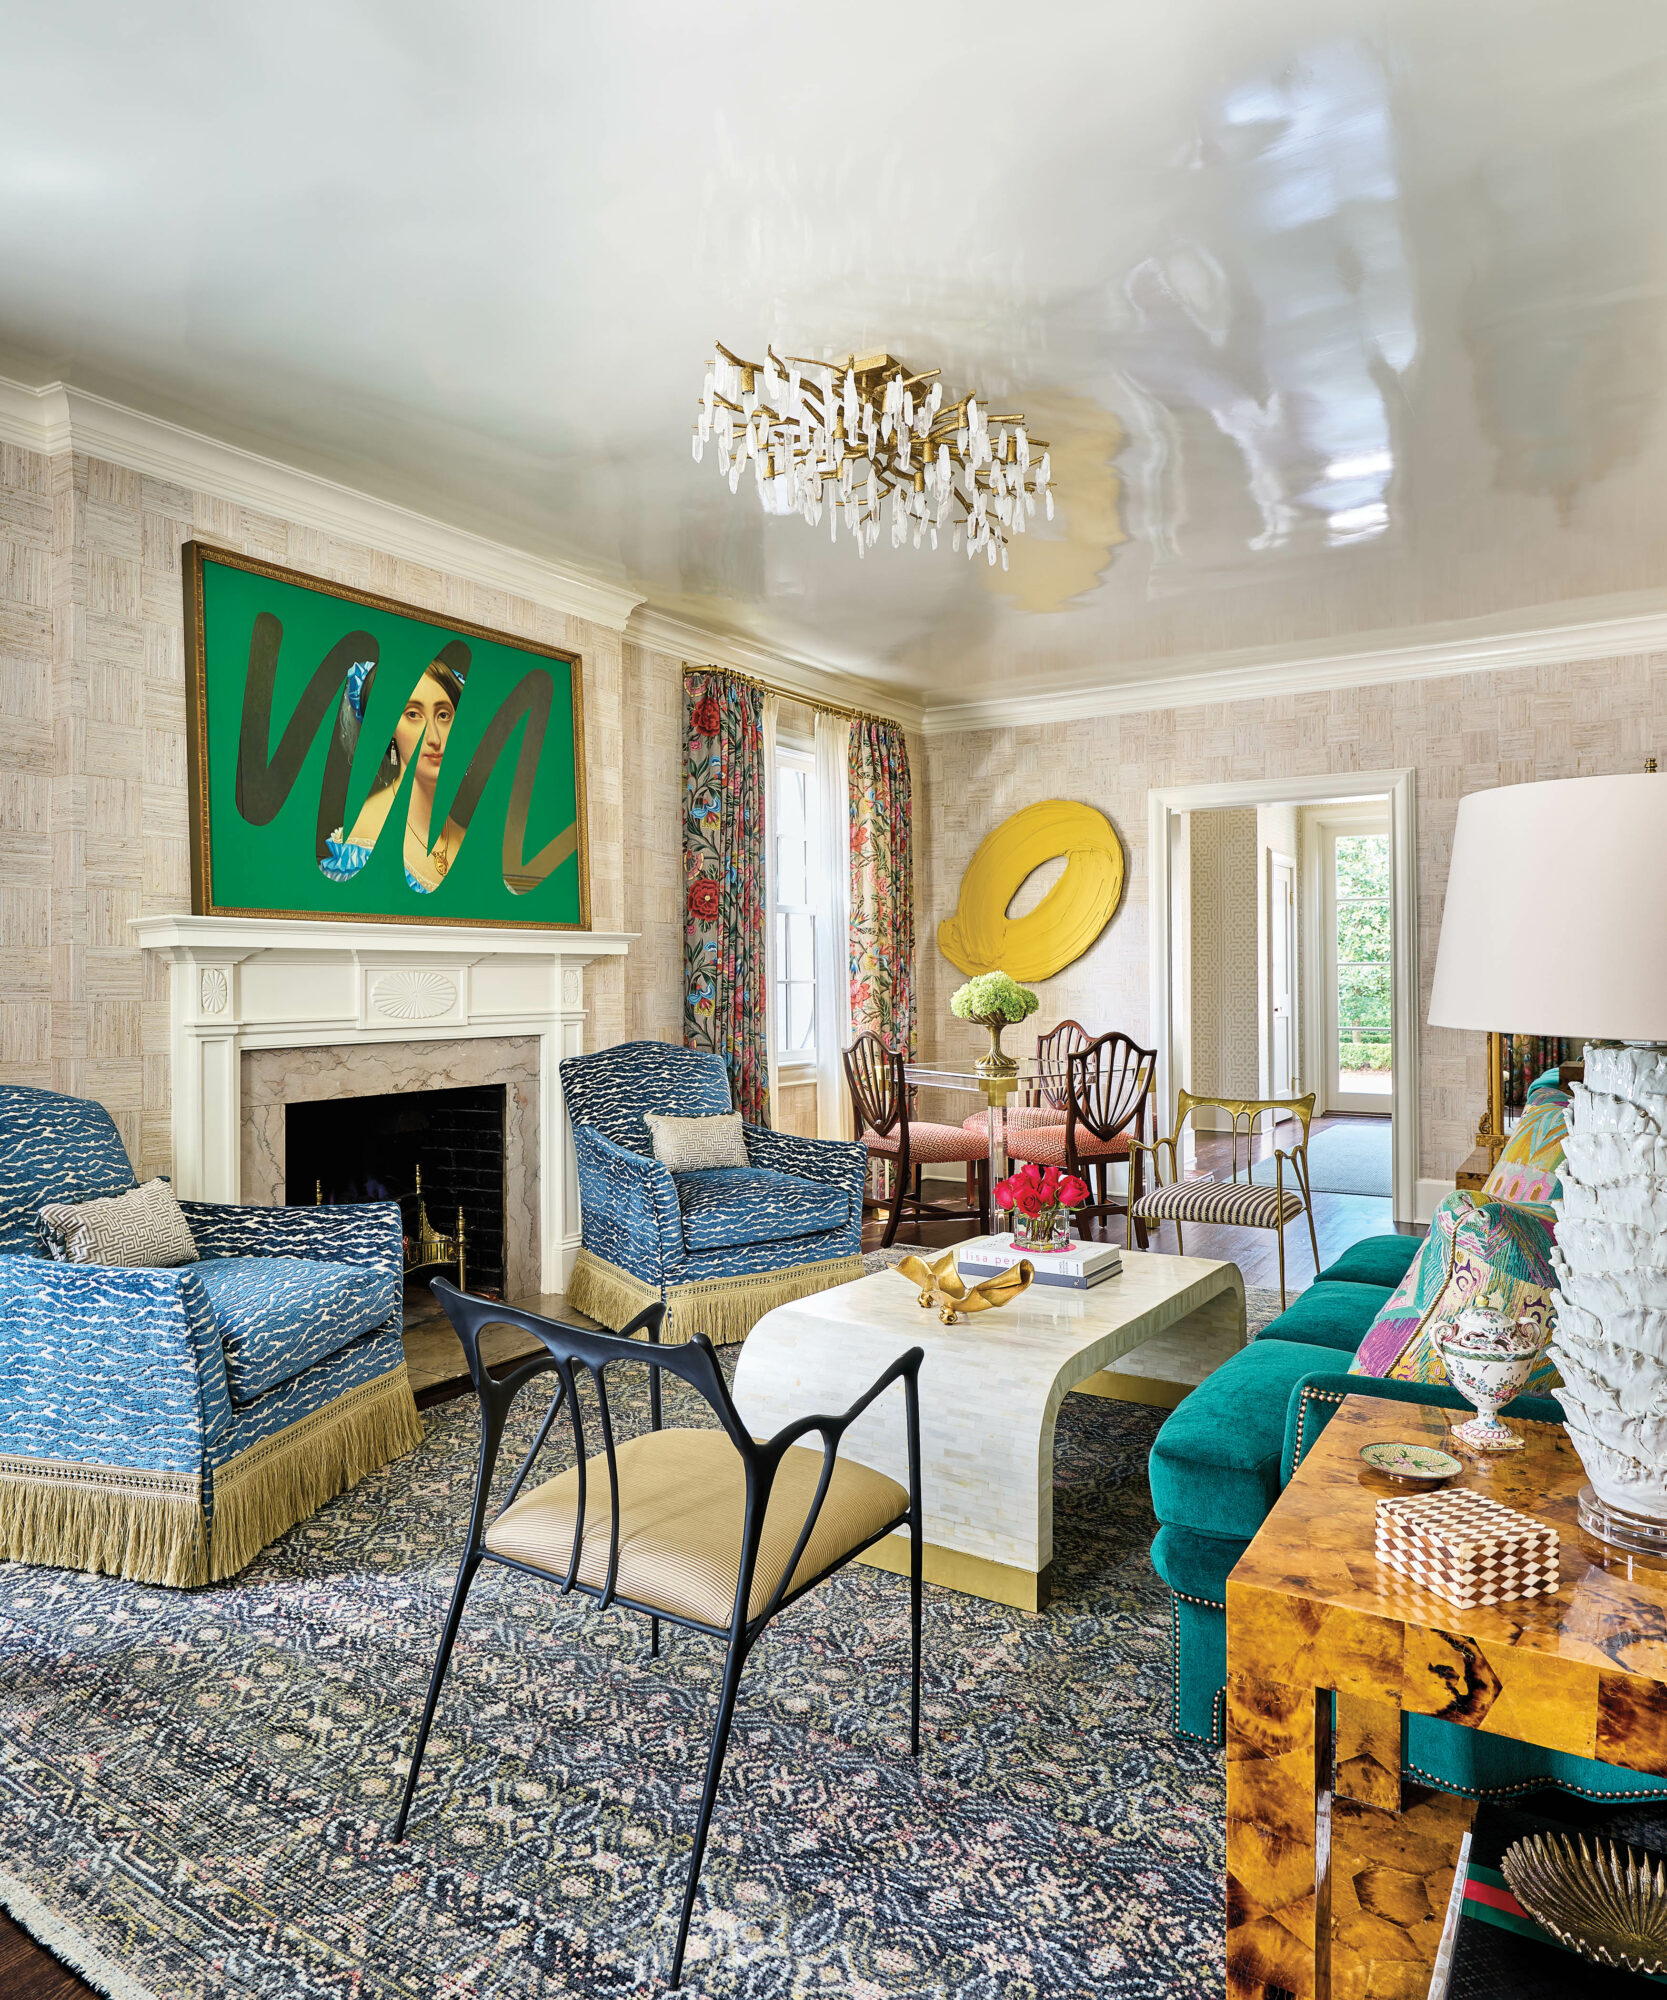 Eclectic Spaces Put A Twist On Tradition In This Charlotte Abode